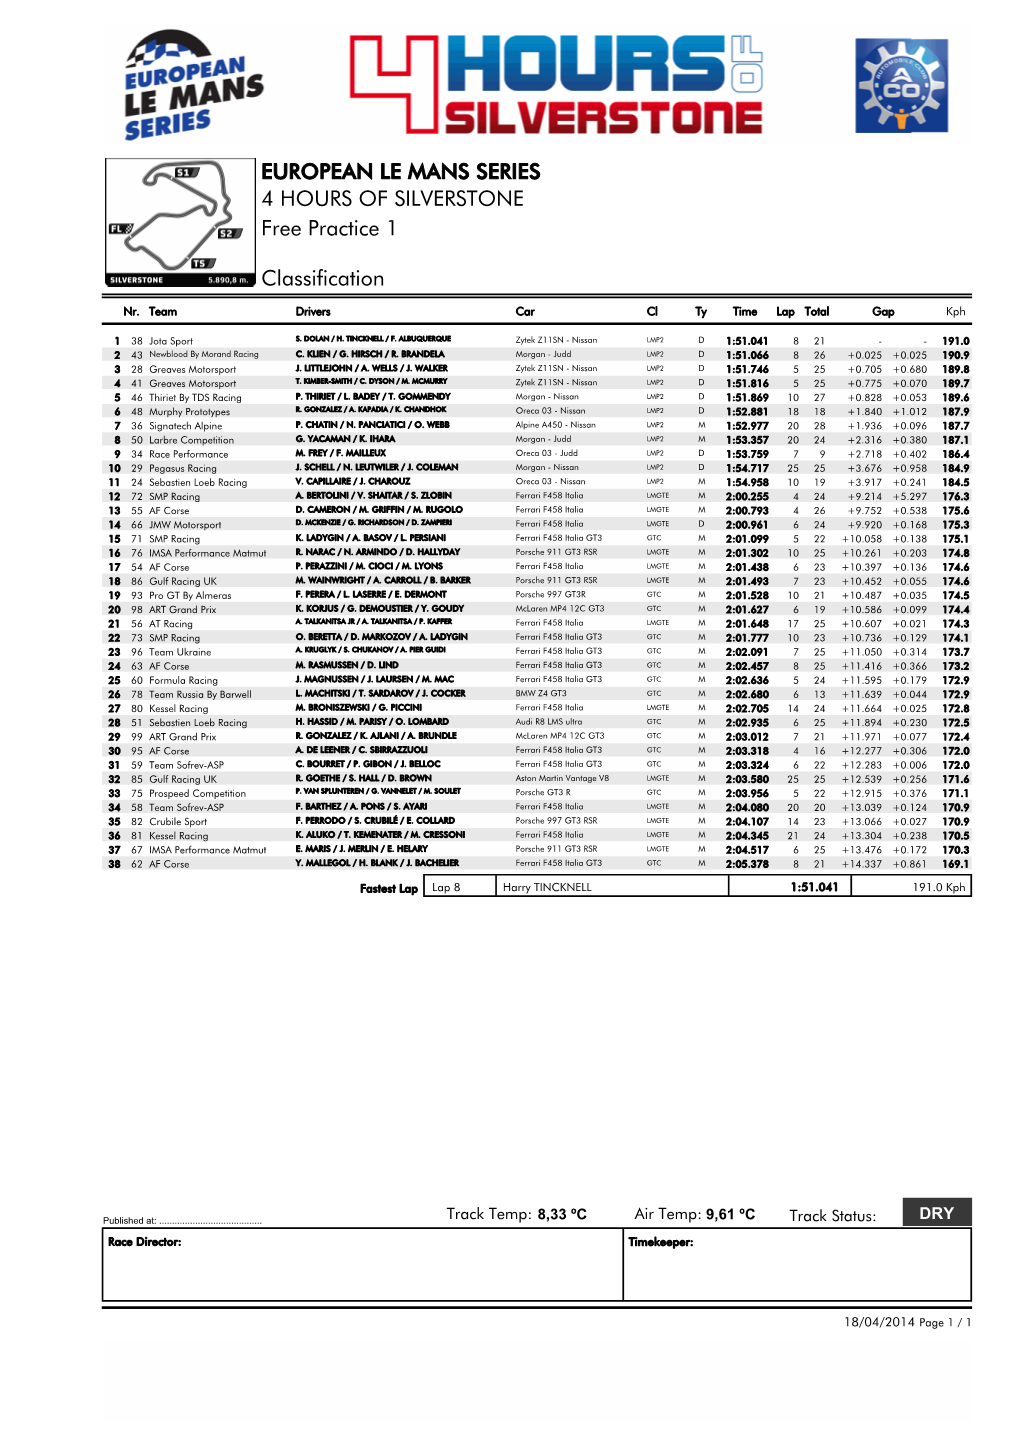 EUROPEAN LE MANS SERIES 4 HOURS of SILVERSTONE Free Practice 1